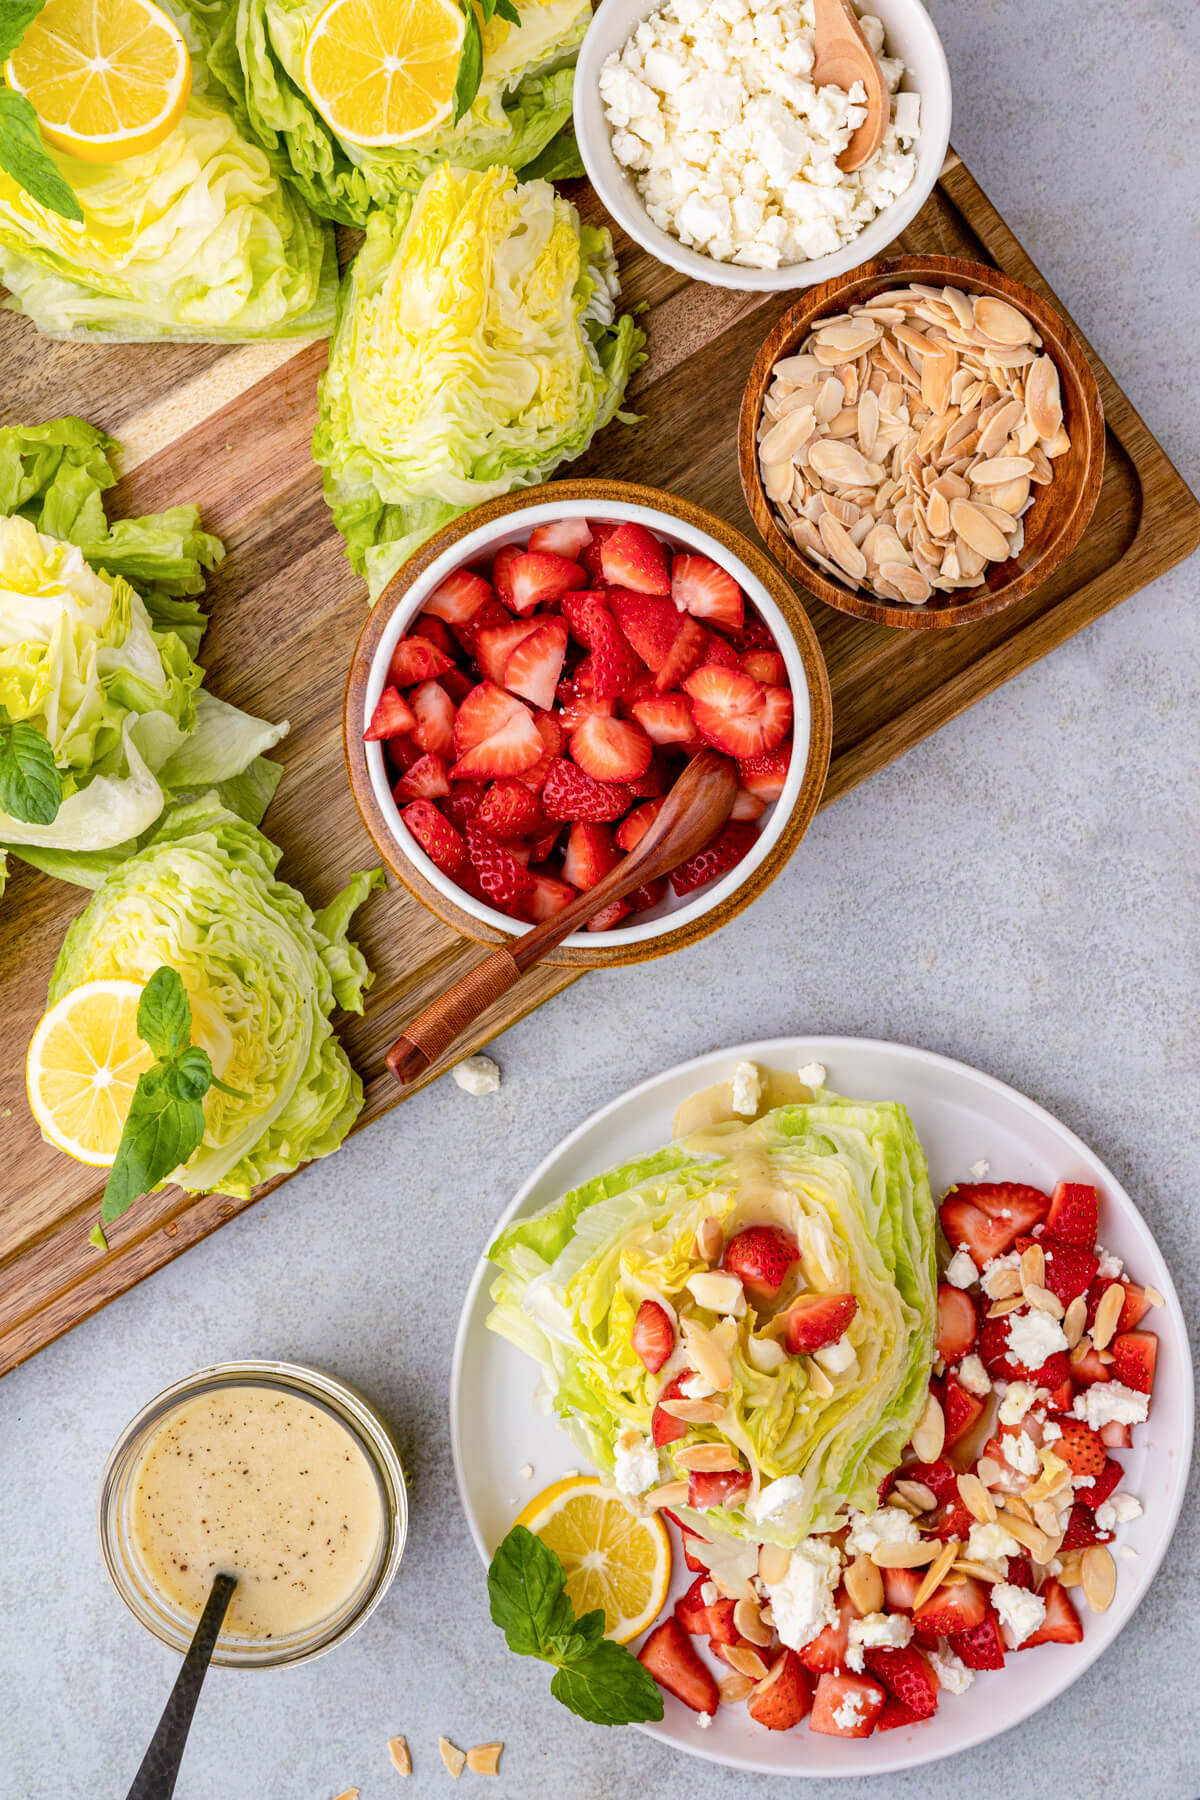 A Strawberry Feta Wedge Salad on white plate in front of a salad serving board.